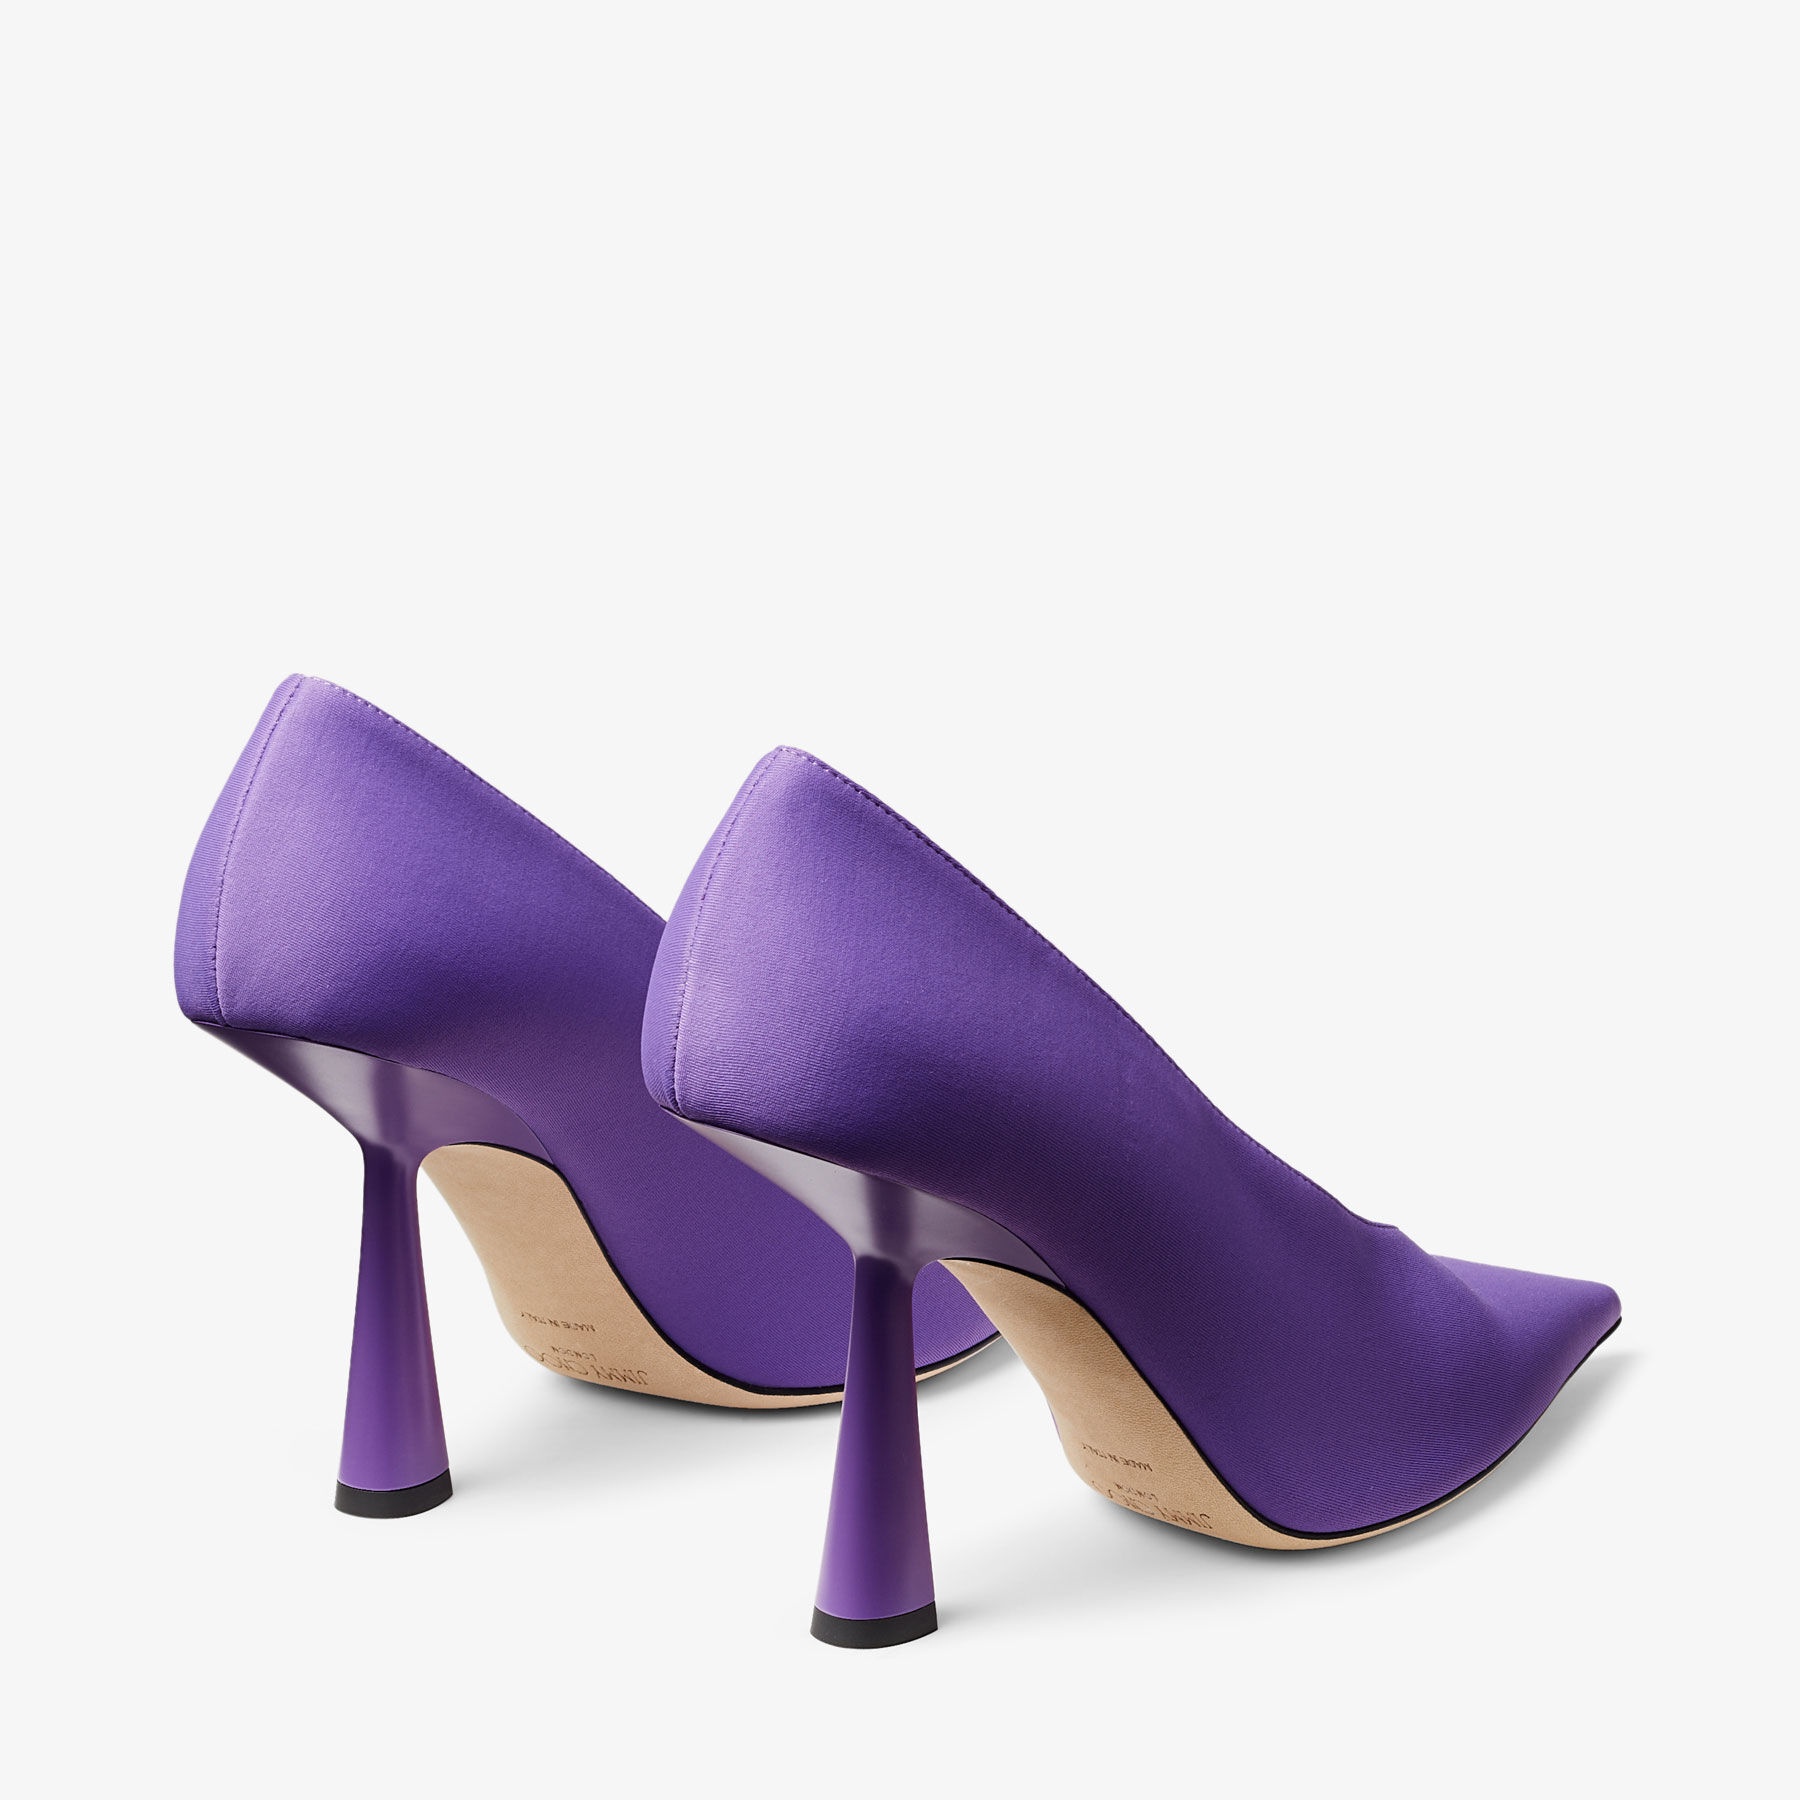 Maryanne 100
Cassis Lycra Pointed-Toe Pumps - 5